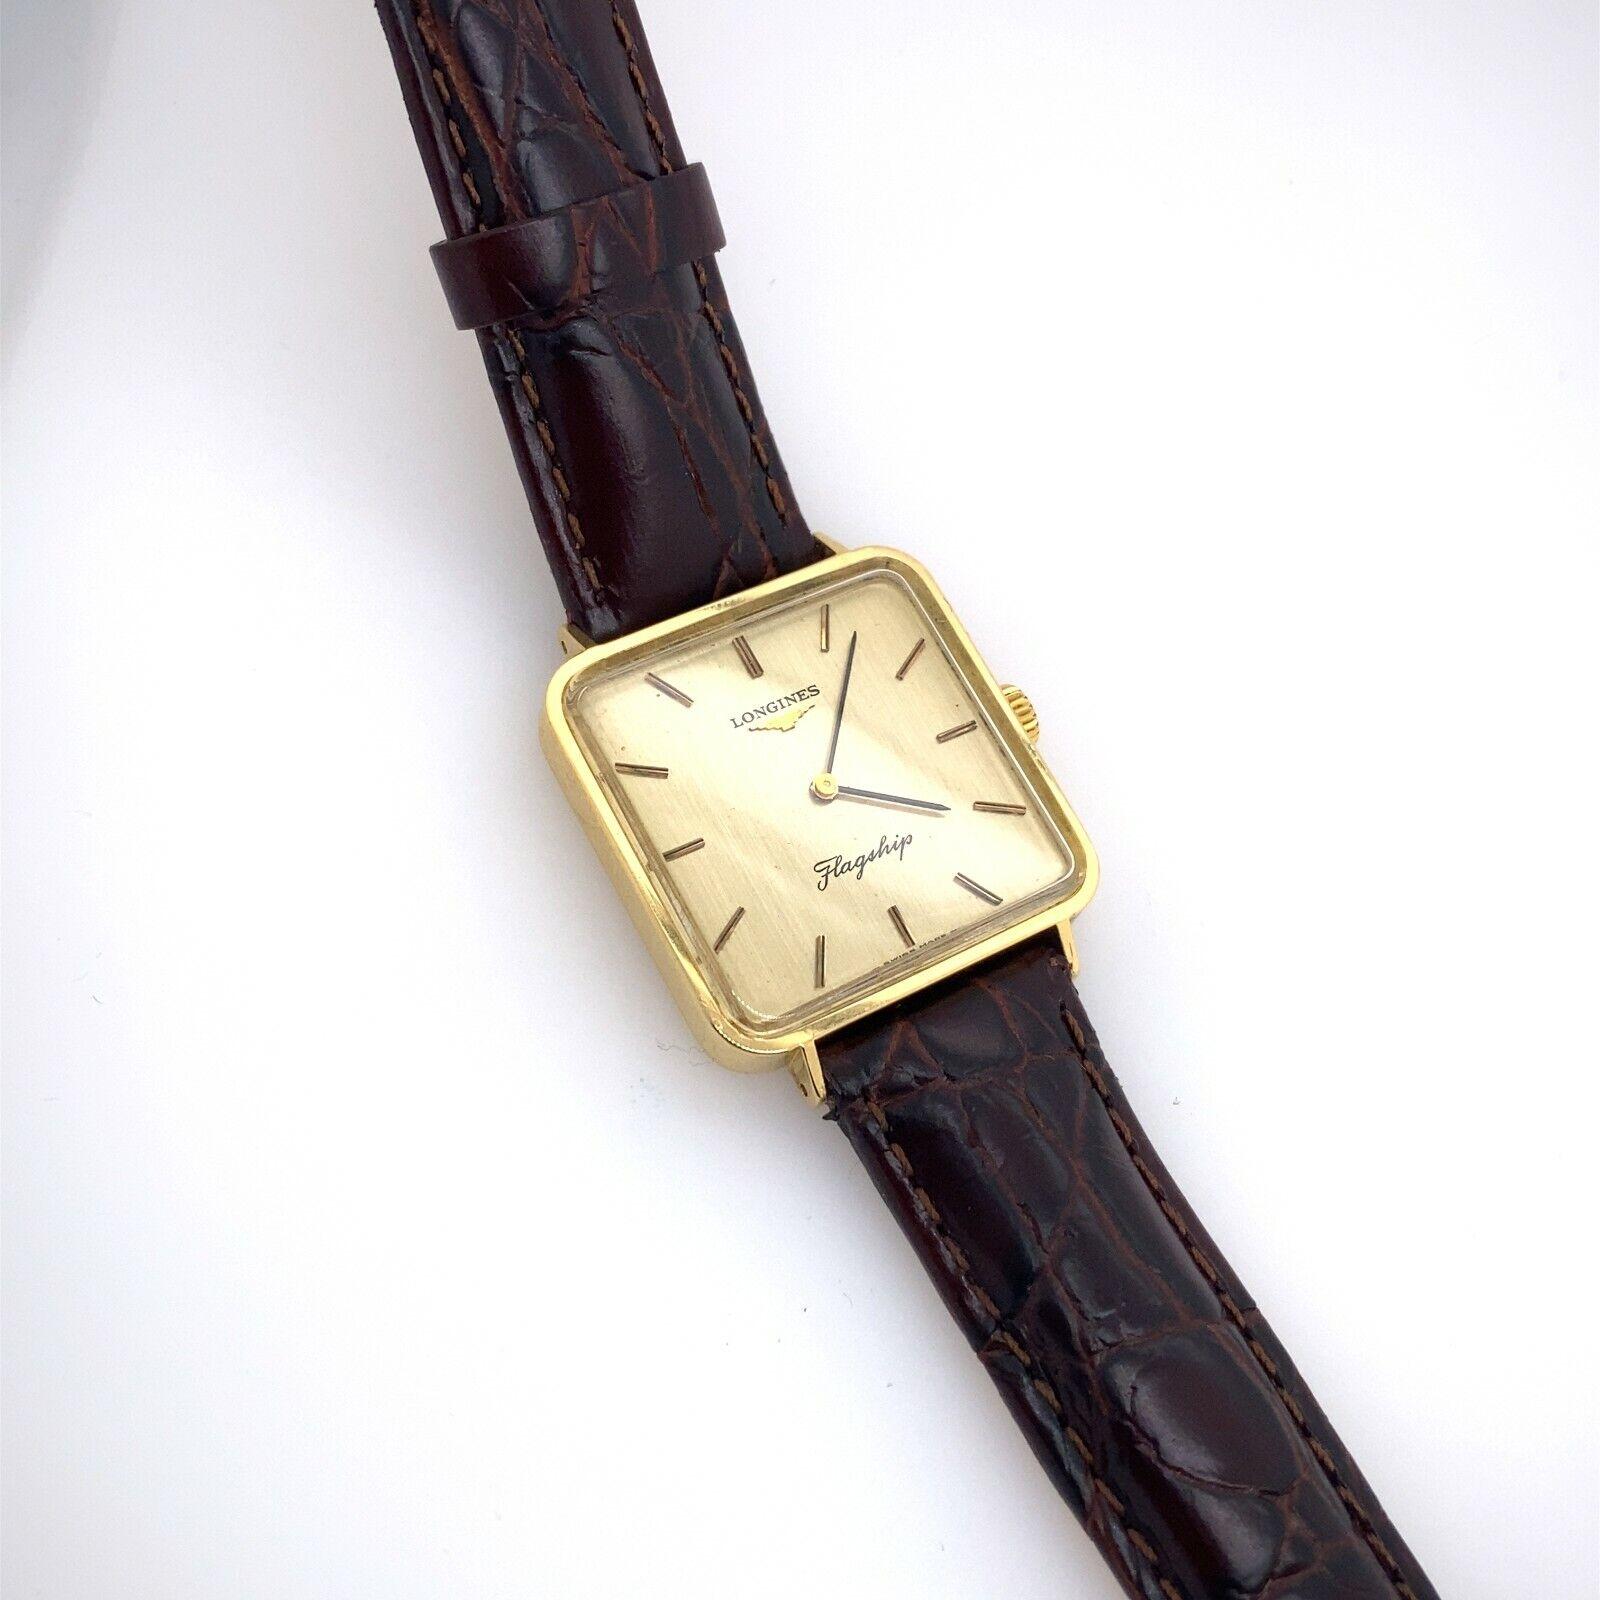 Vintage 18ct Yellow Gold Longines Square Flagship Watch

Vintage 18ct Yellow Gold Longines Square Flagship Watch With Longines buckle on a leather strap.

Additional Information:
Case Size: 29 x 24mm
Lug Width: 18 mm
Case Material: 18ct
Strap Width: